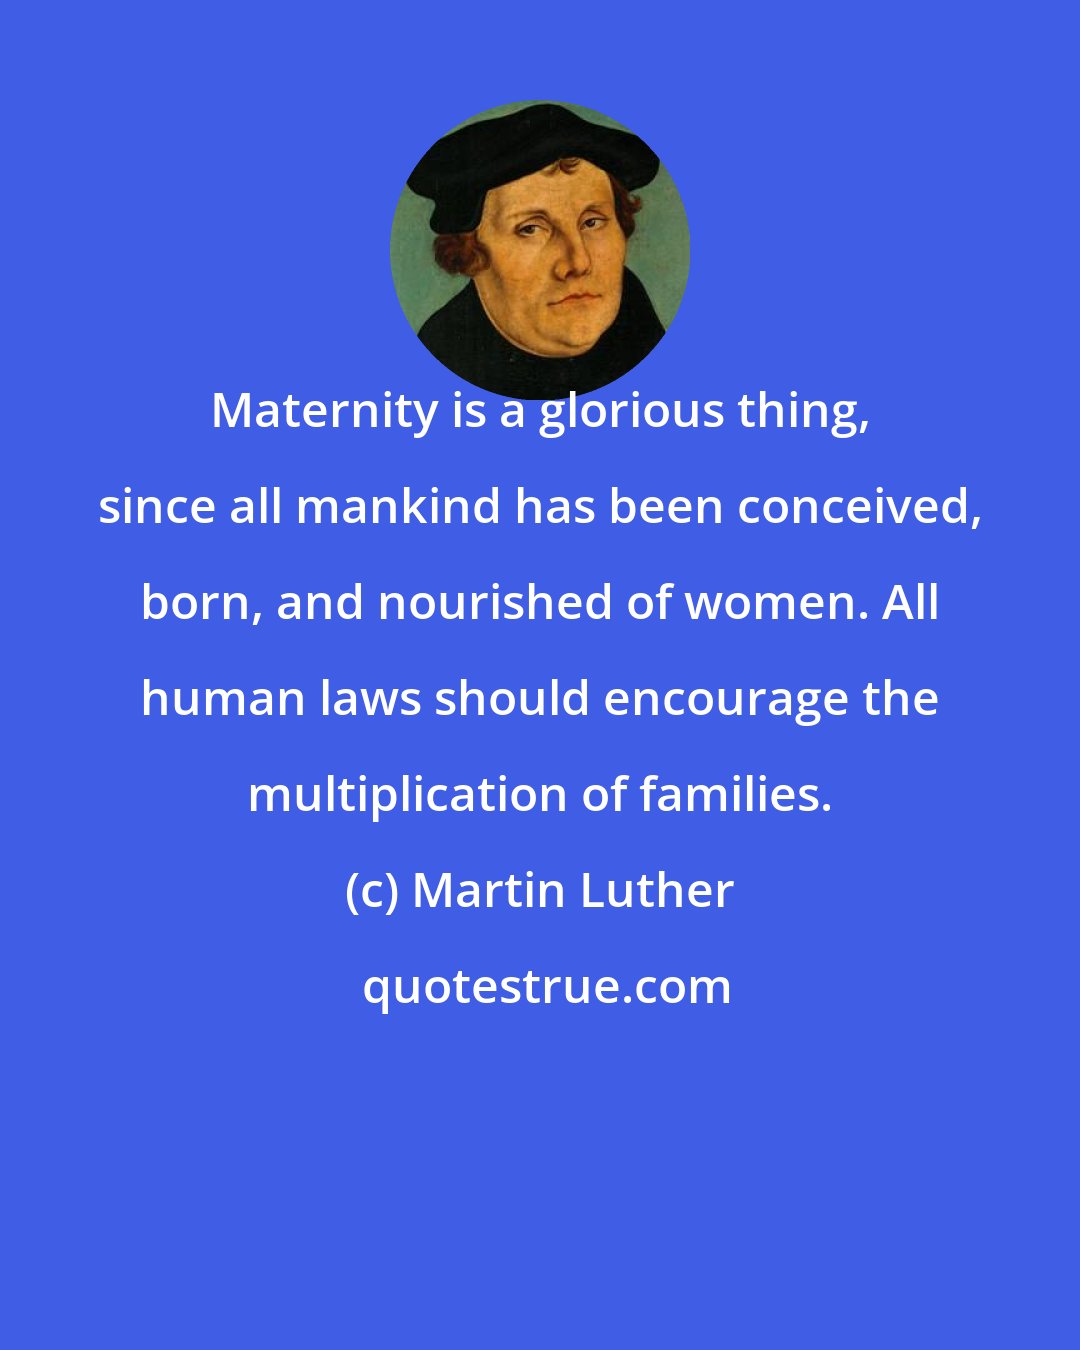 Martin Luther: Maternity is a glorious thing, since all mankind has been conceived, born, and nourished of women. All human laws should encourage the multiplication of families.